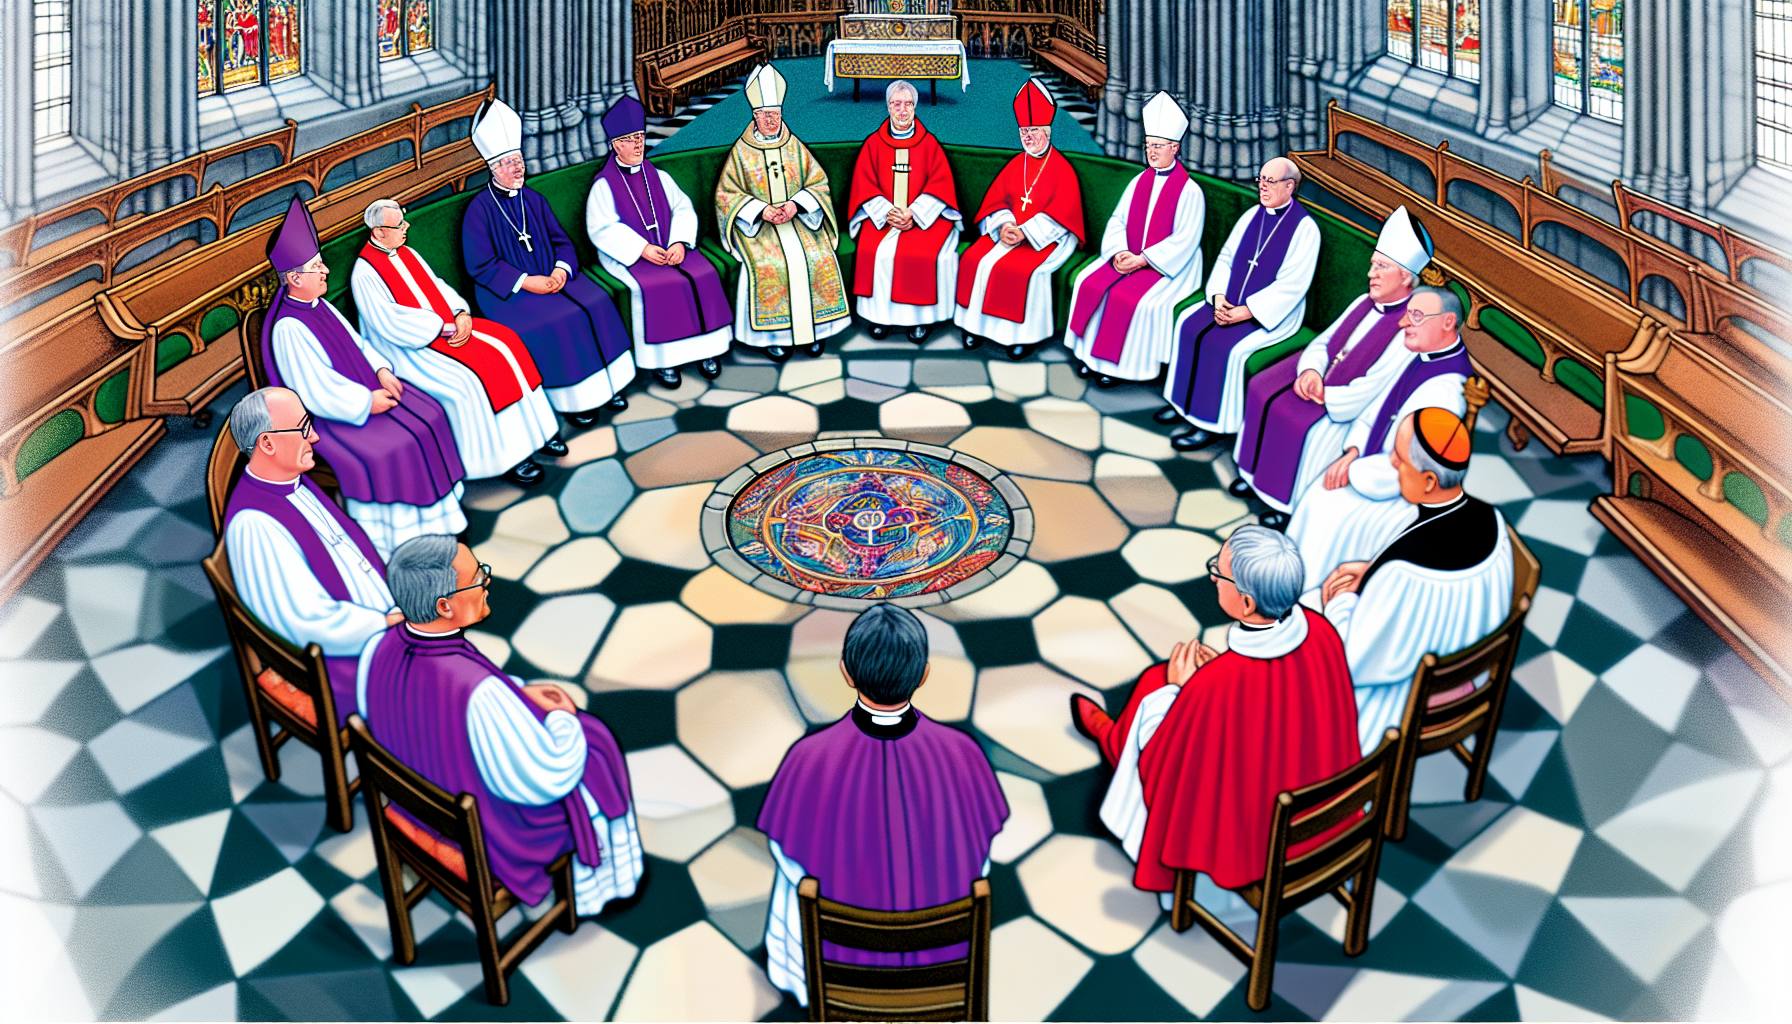 Anglican and Roman Catholic bishops engaged in ecumenical dialogue